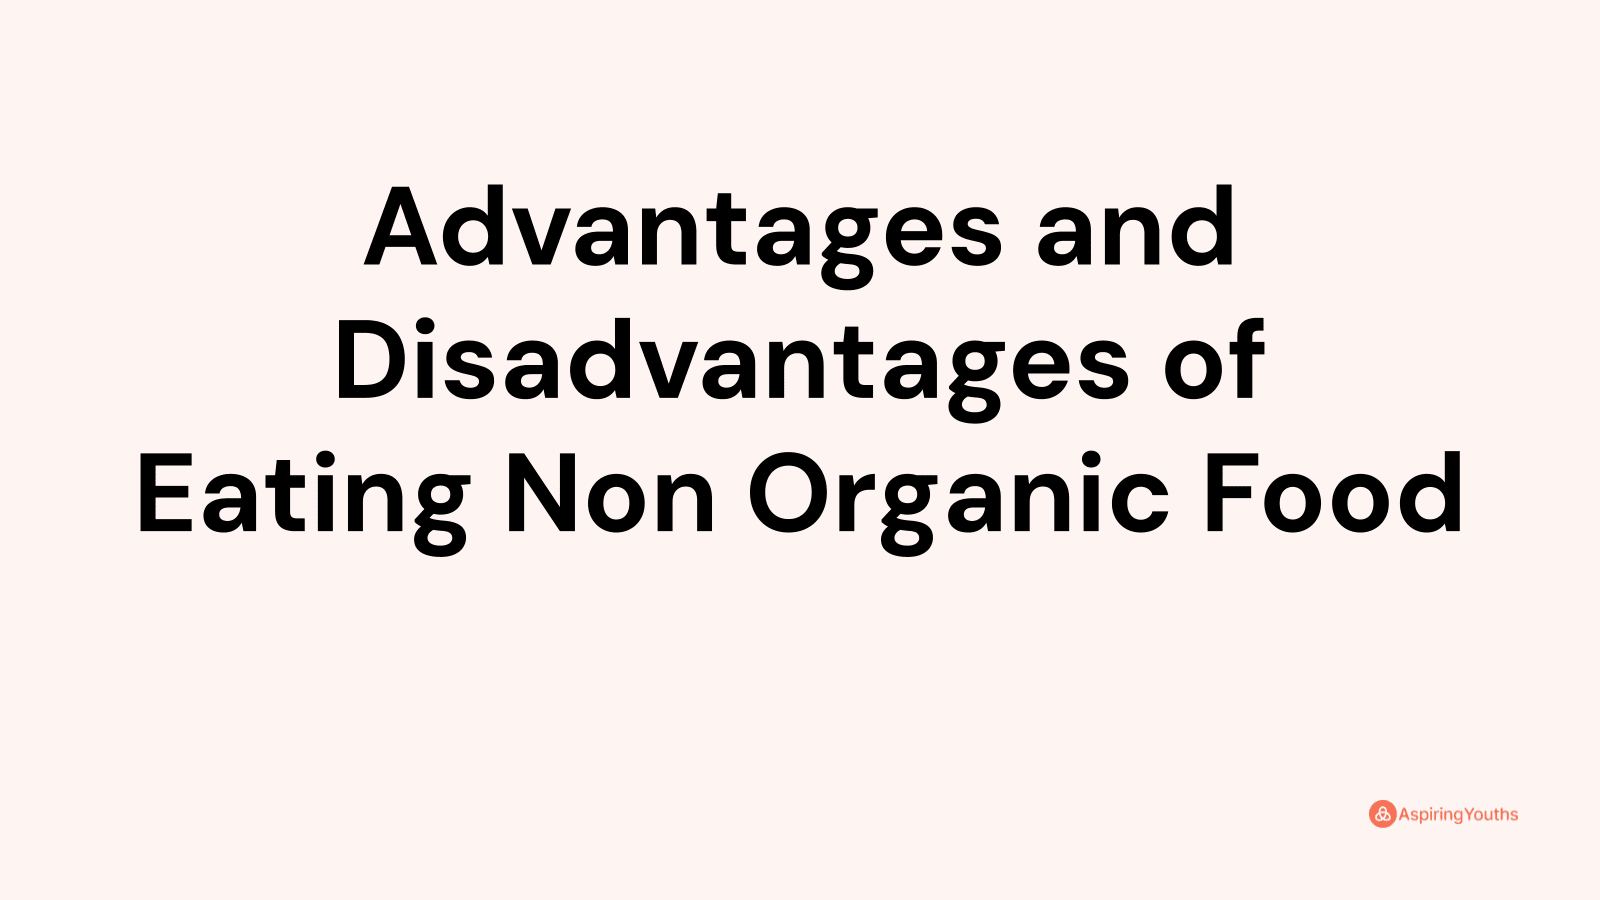 Advantages and disadvantages of Eating Non Organic Food